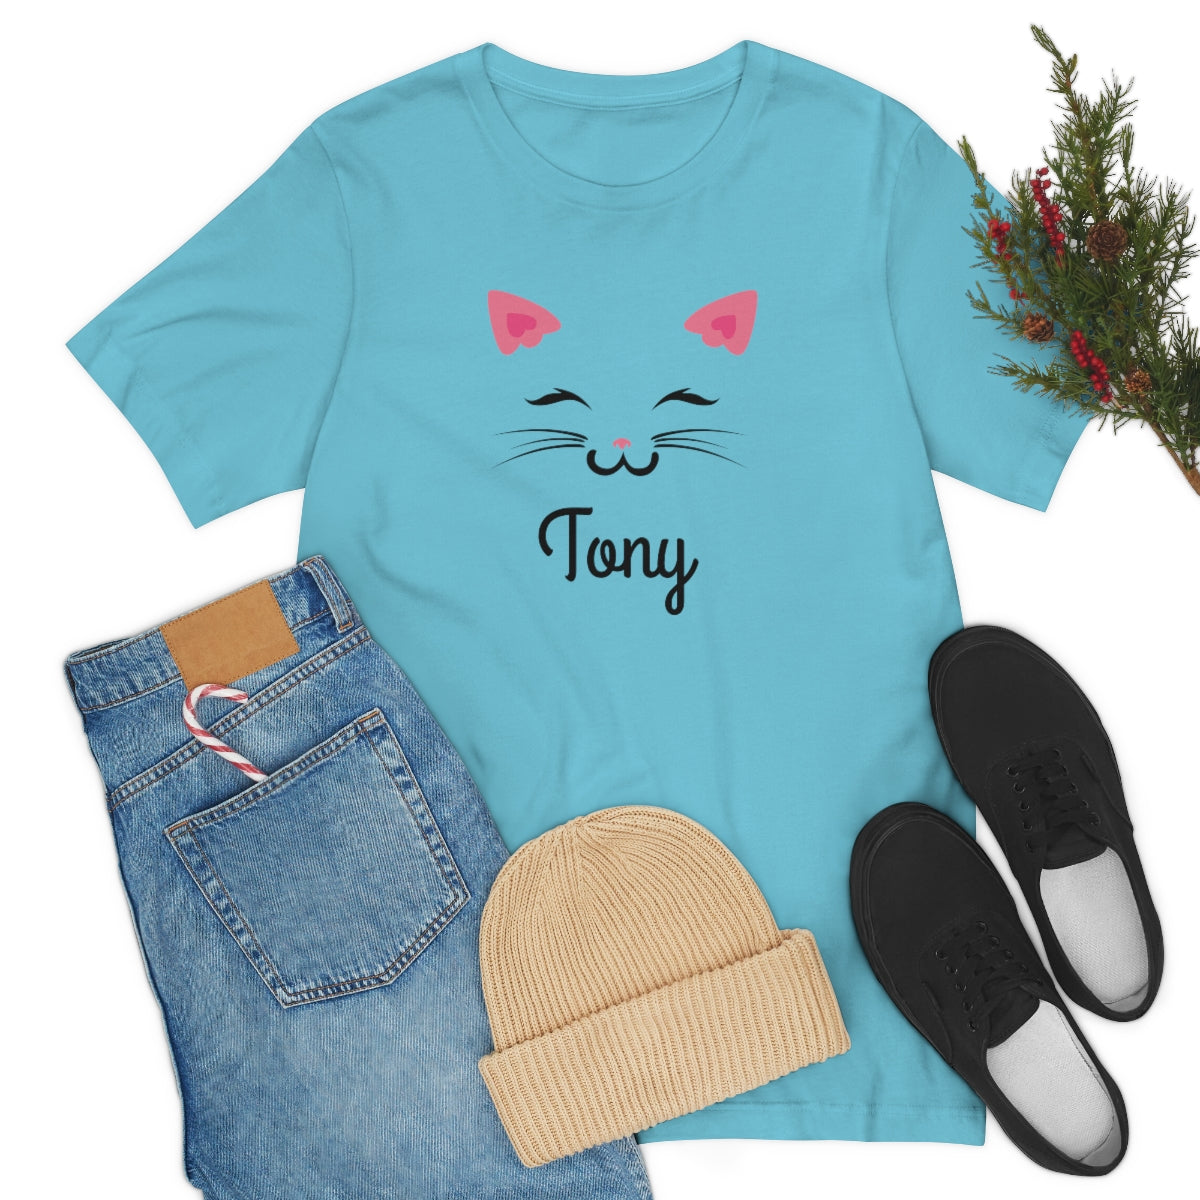 CAT MEMORIAL TEE PERSONALIZED UNISEX JERSY, CAT LINE ART FACE SHIRT